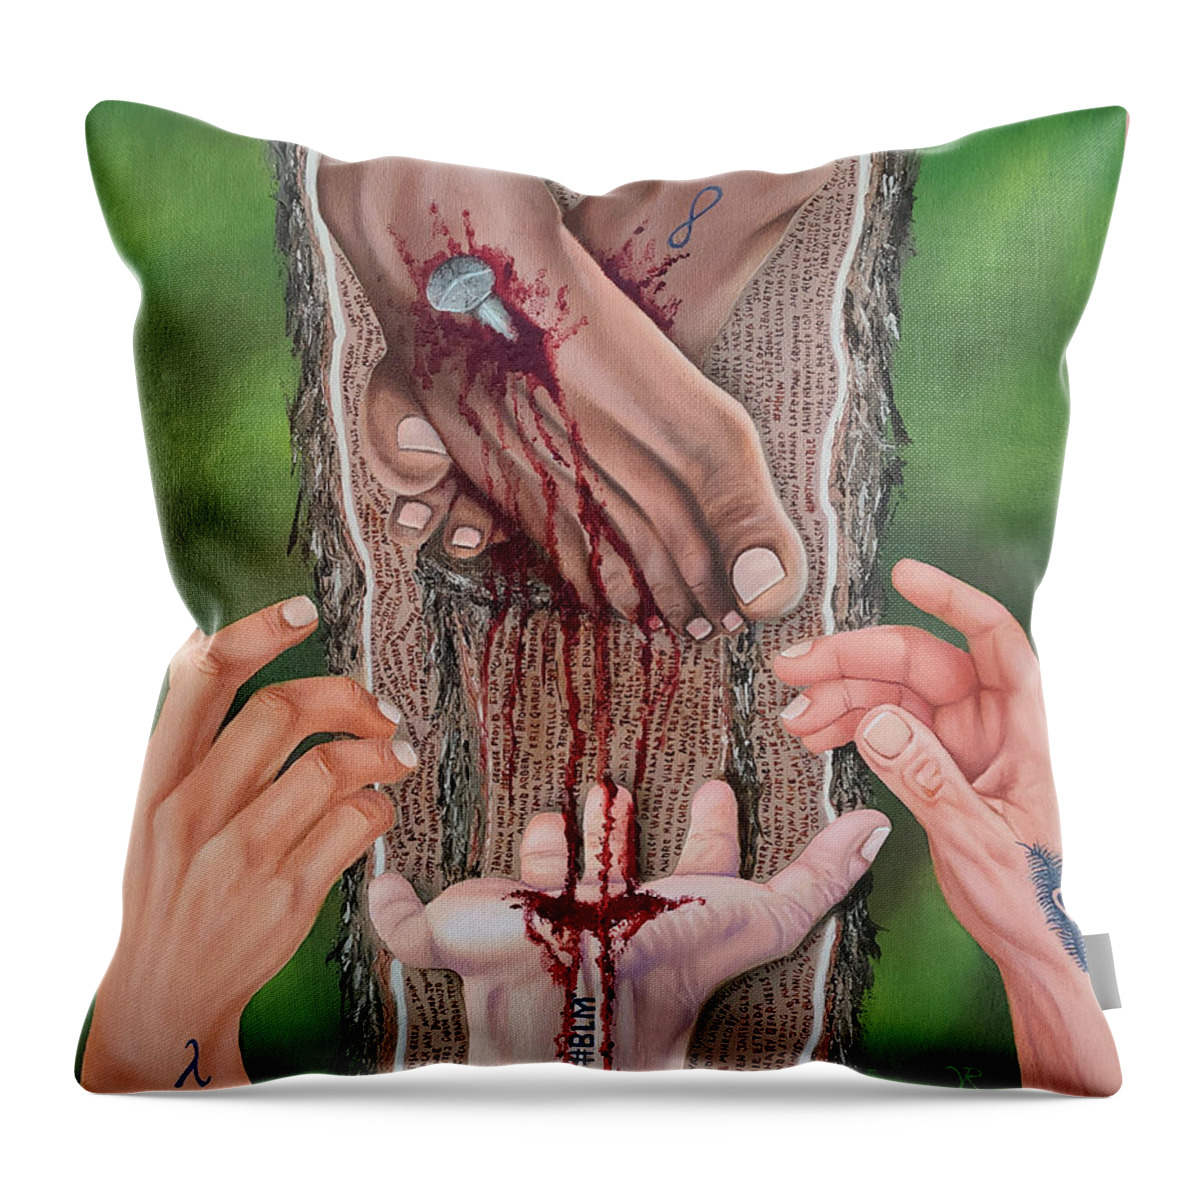 Social Awareness Throw Pillow featuring the painting I Am My Brother's Keeper by Vic Ritchey